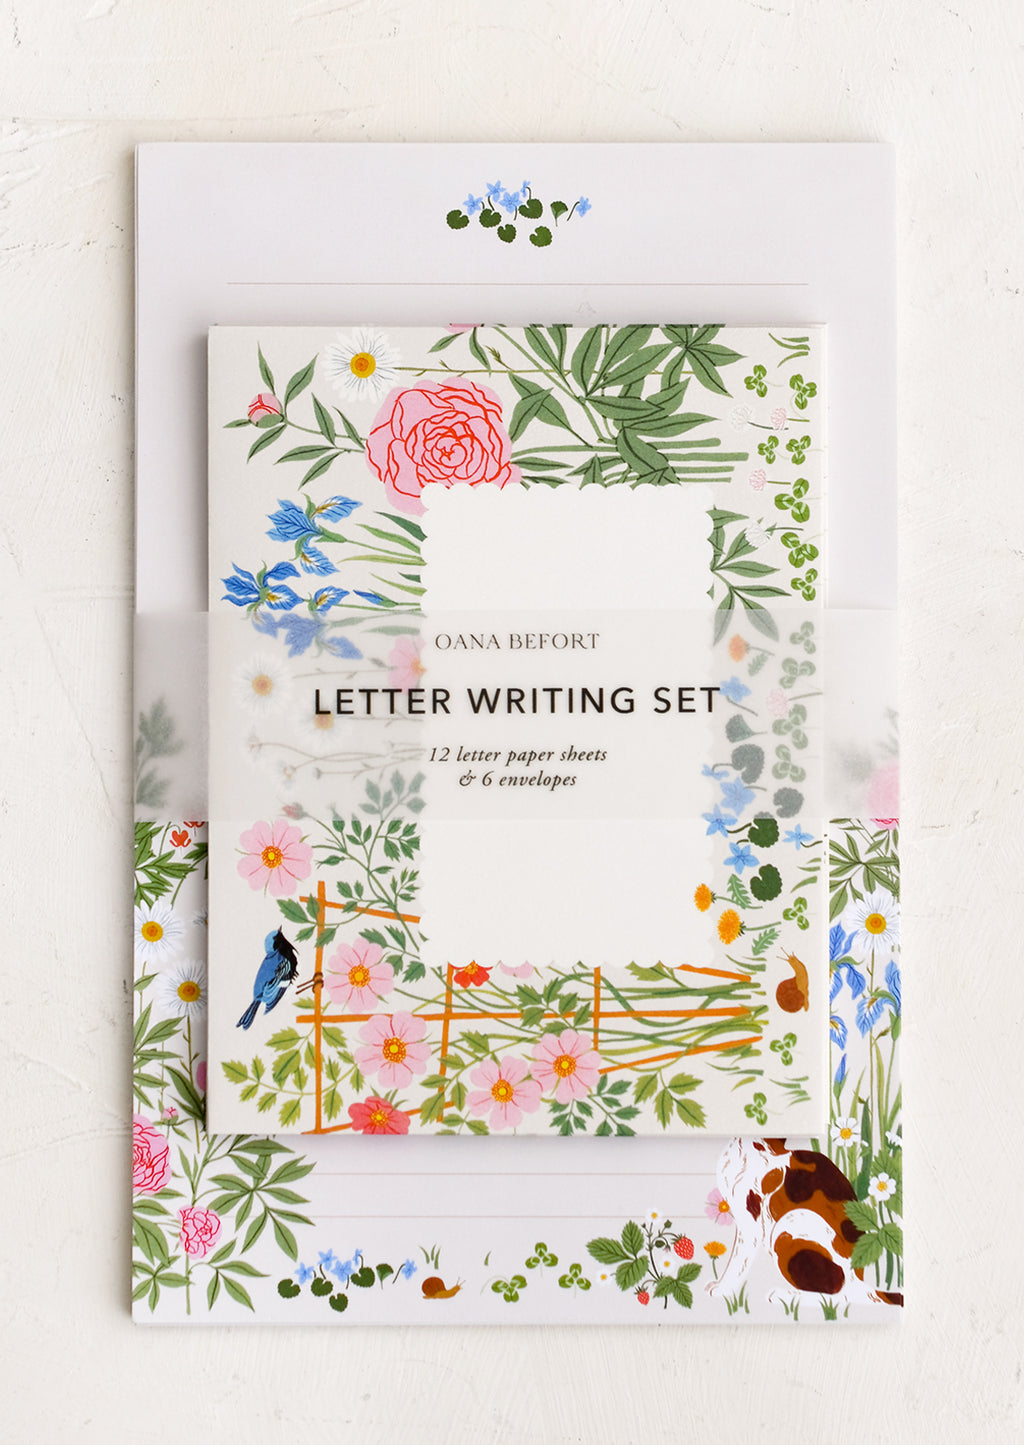 Garden Florals: A set of white and colorful garden print letter writing kit.